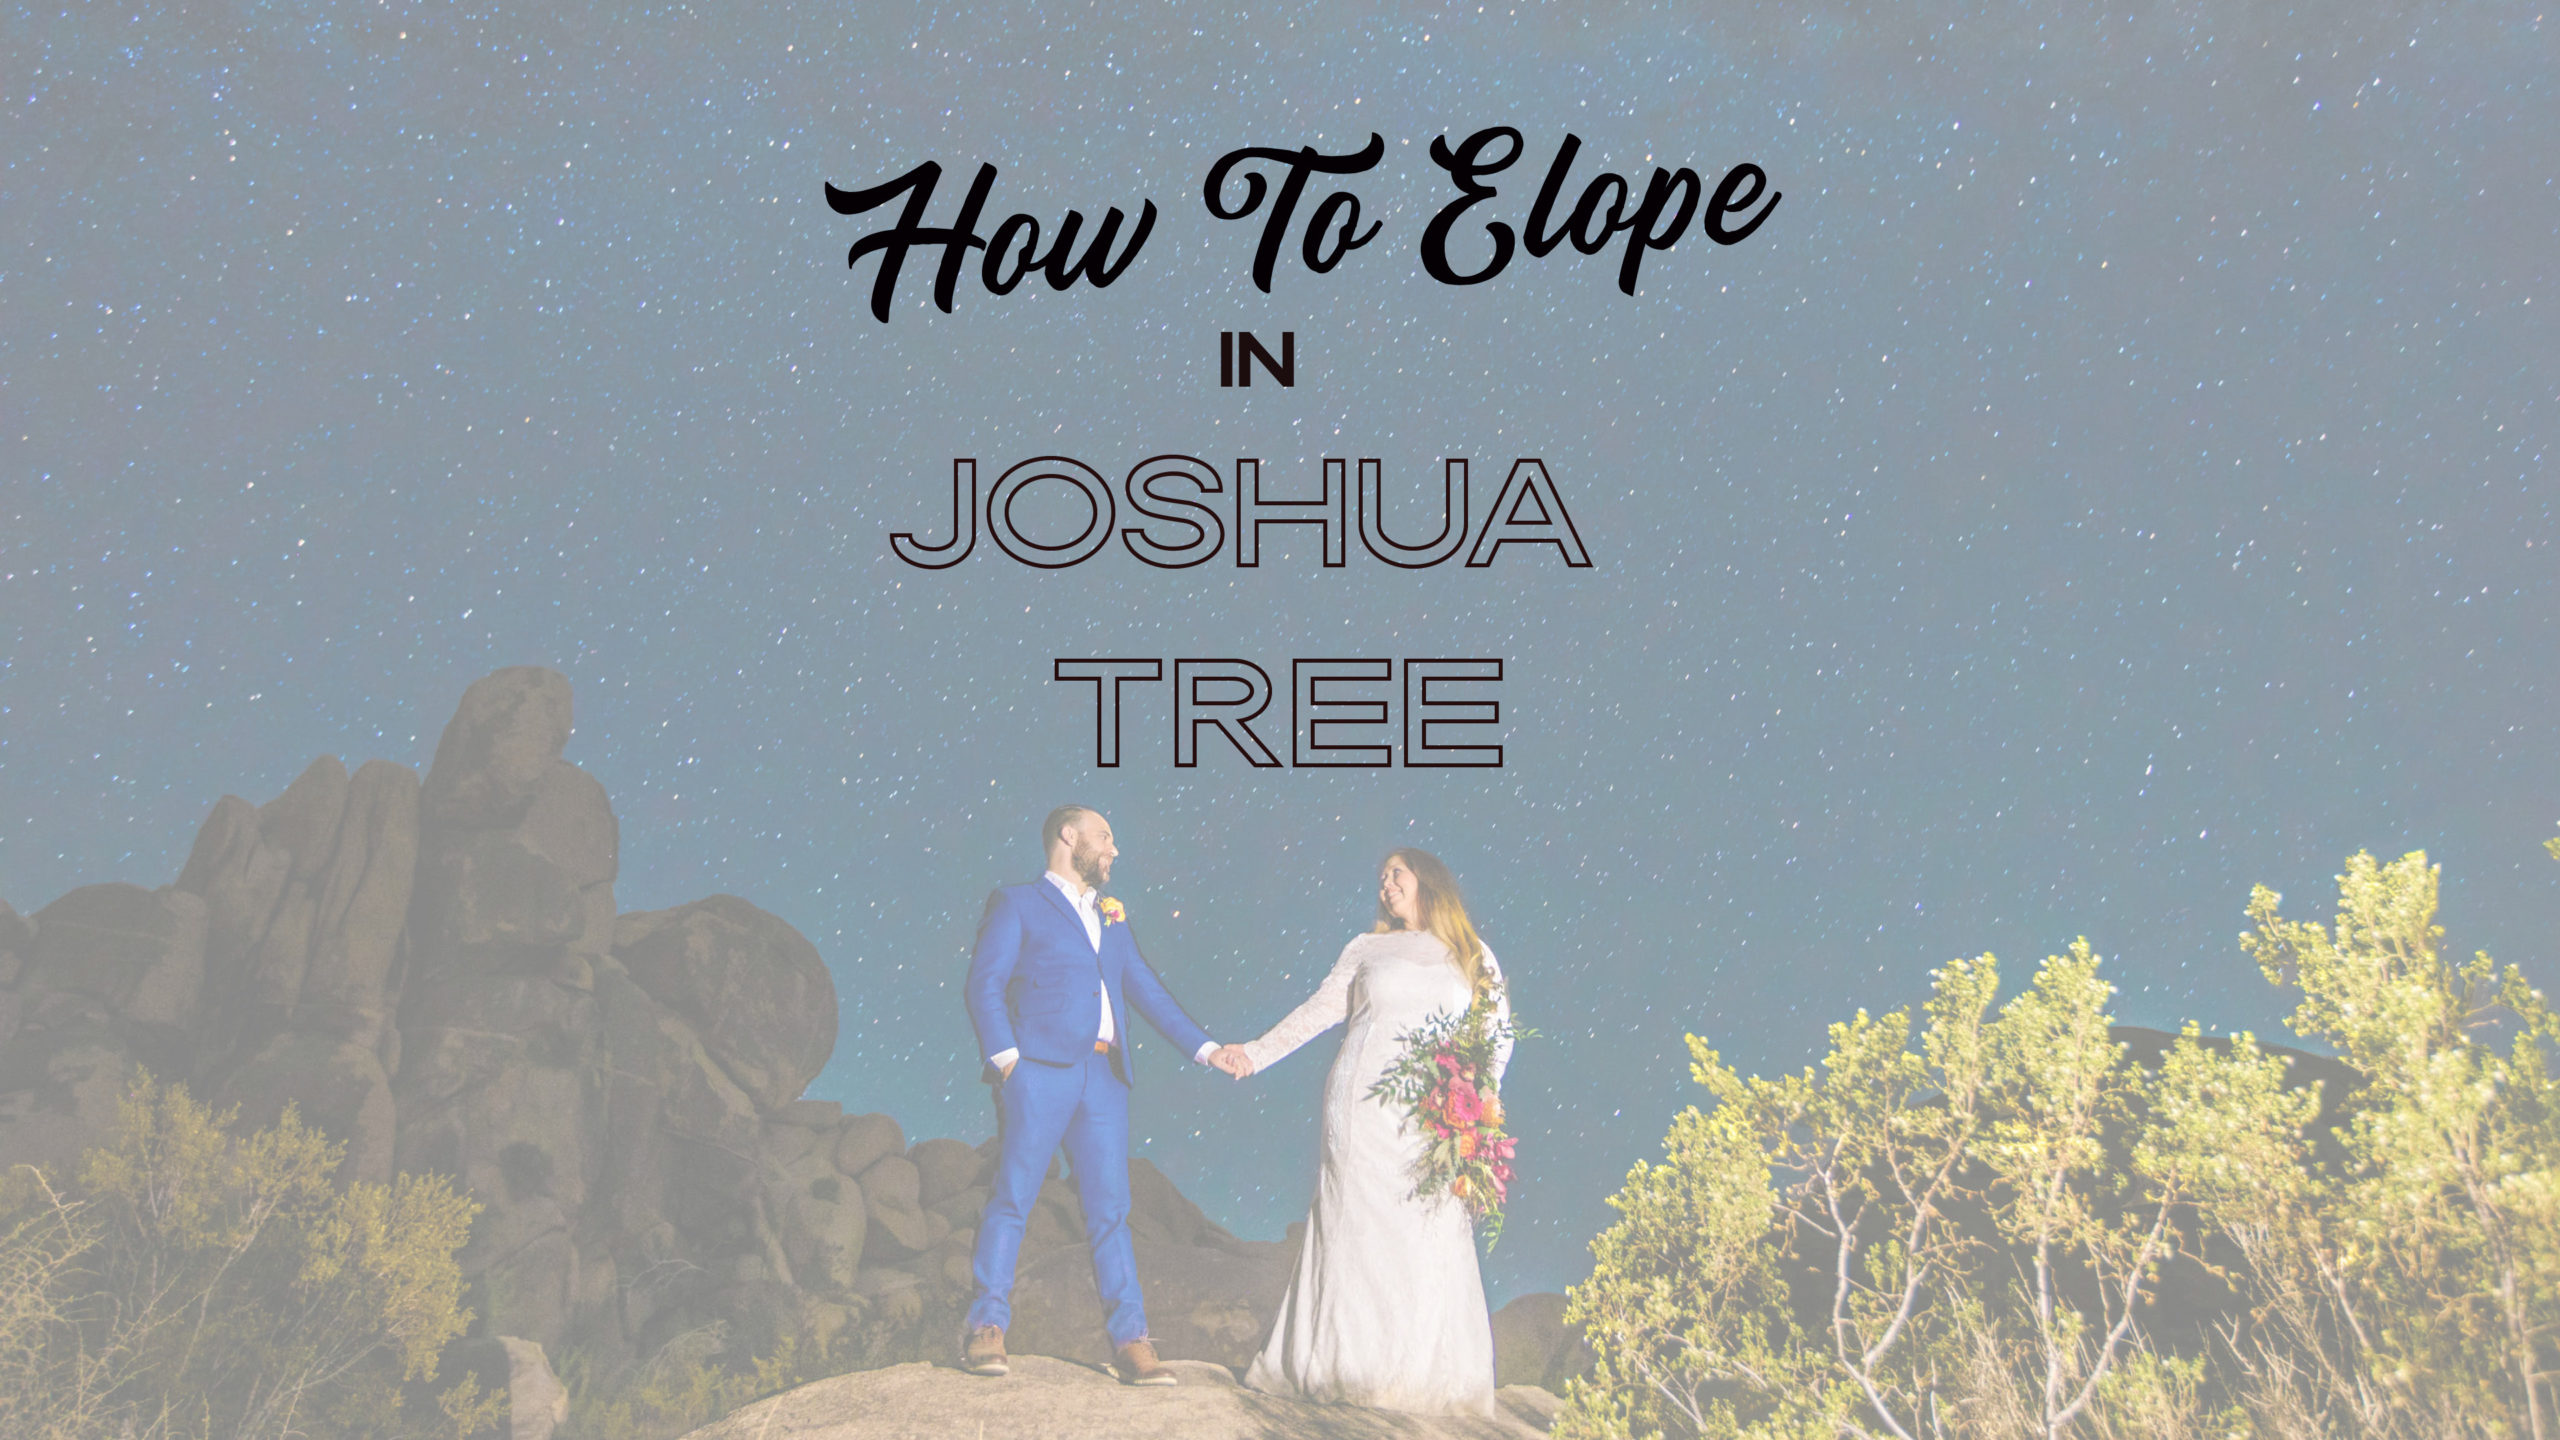 How-to-Elope-in-Joshua-Tree-scaled Joshua Tree Elopement Guide: Where, How & When to Elope to this Dreamy Destination